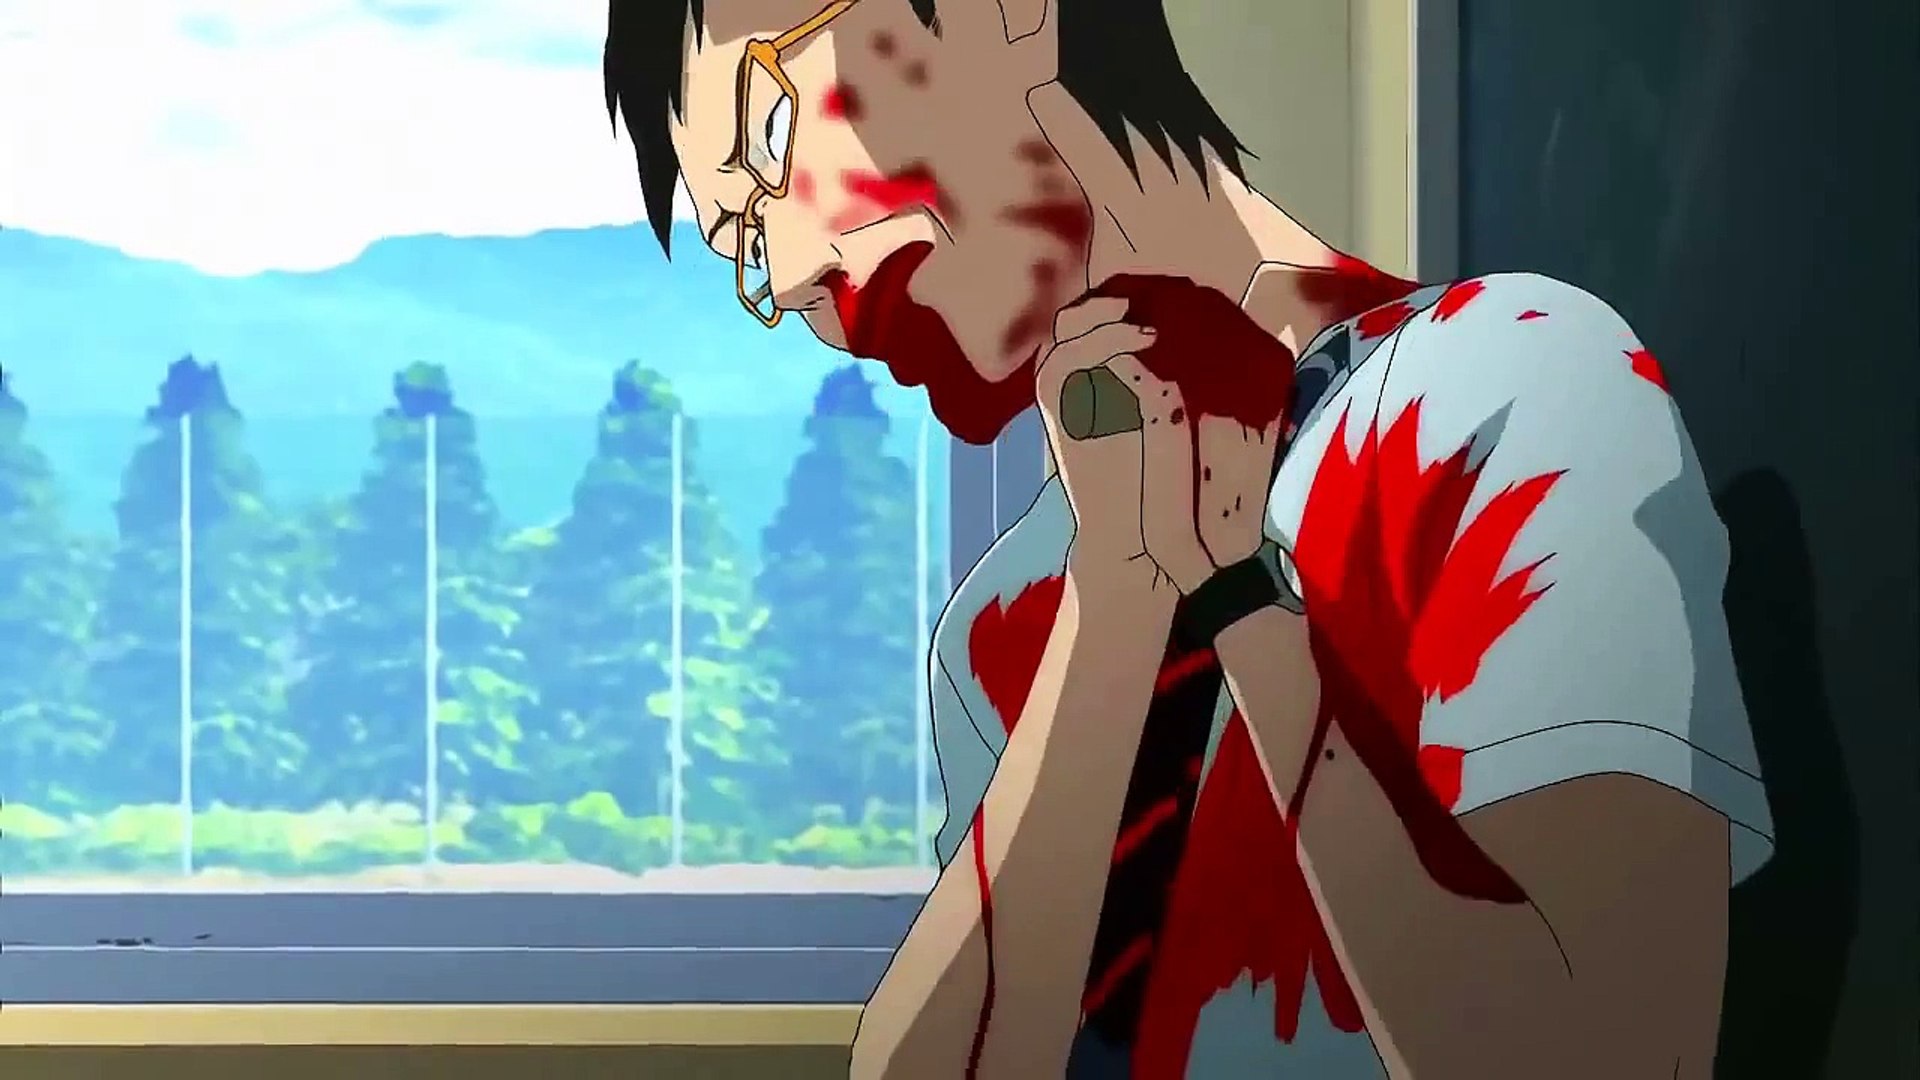 Zombie Deaths Blood Gore Anime AMV Dubstep - video Dailymotion